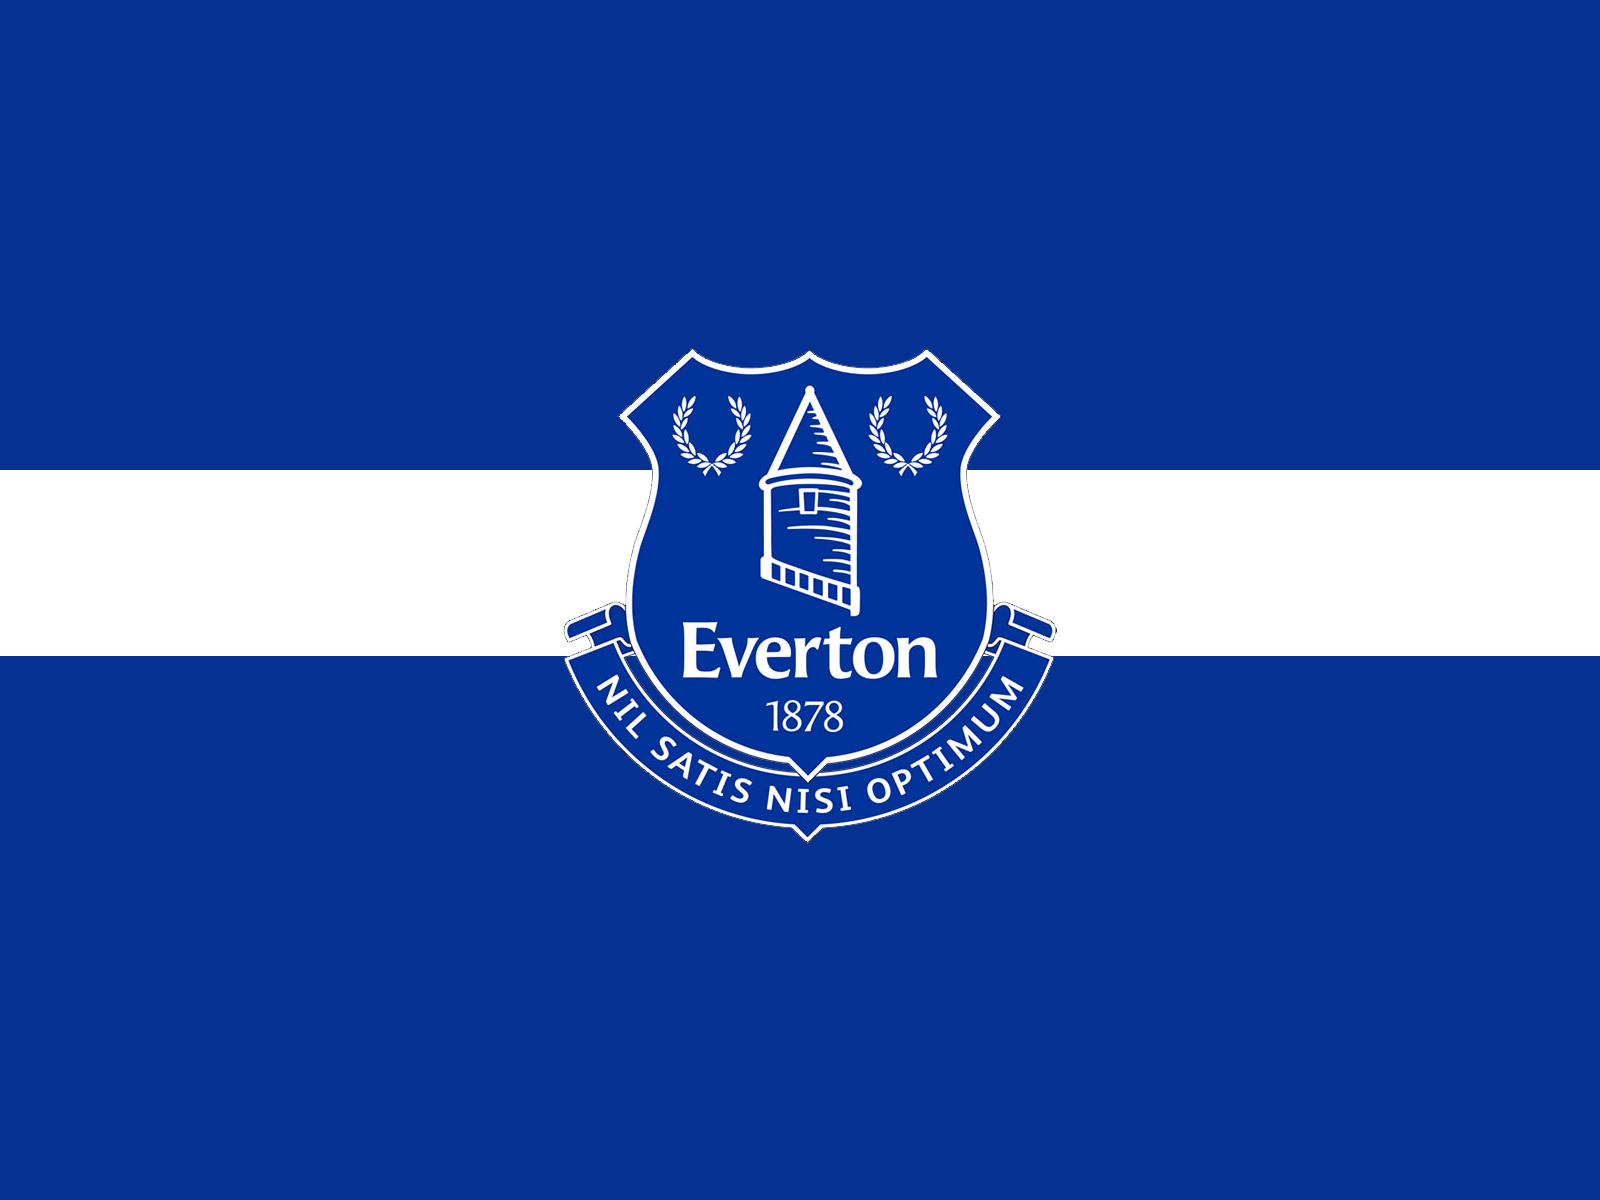 Anybody have any wallpapers with the new crest on? : Everton